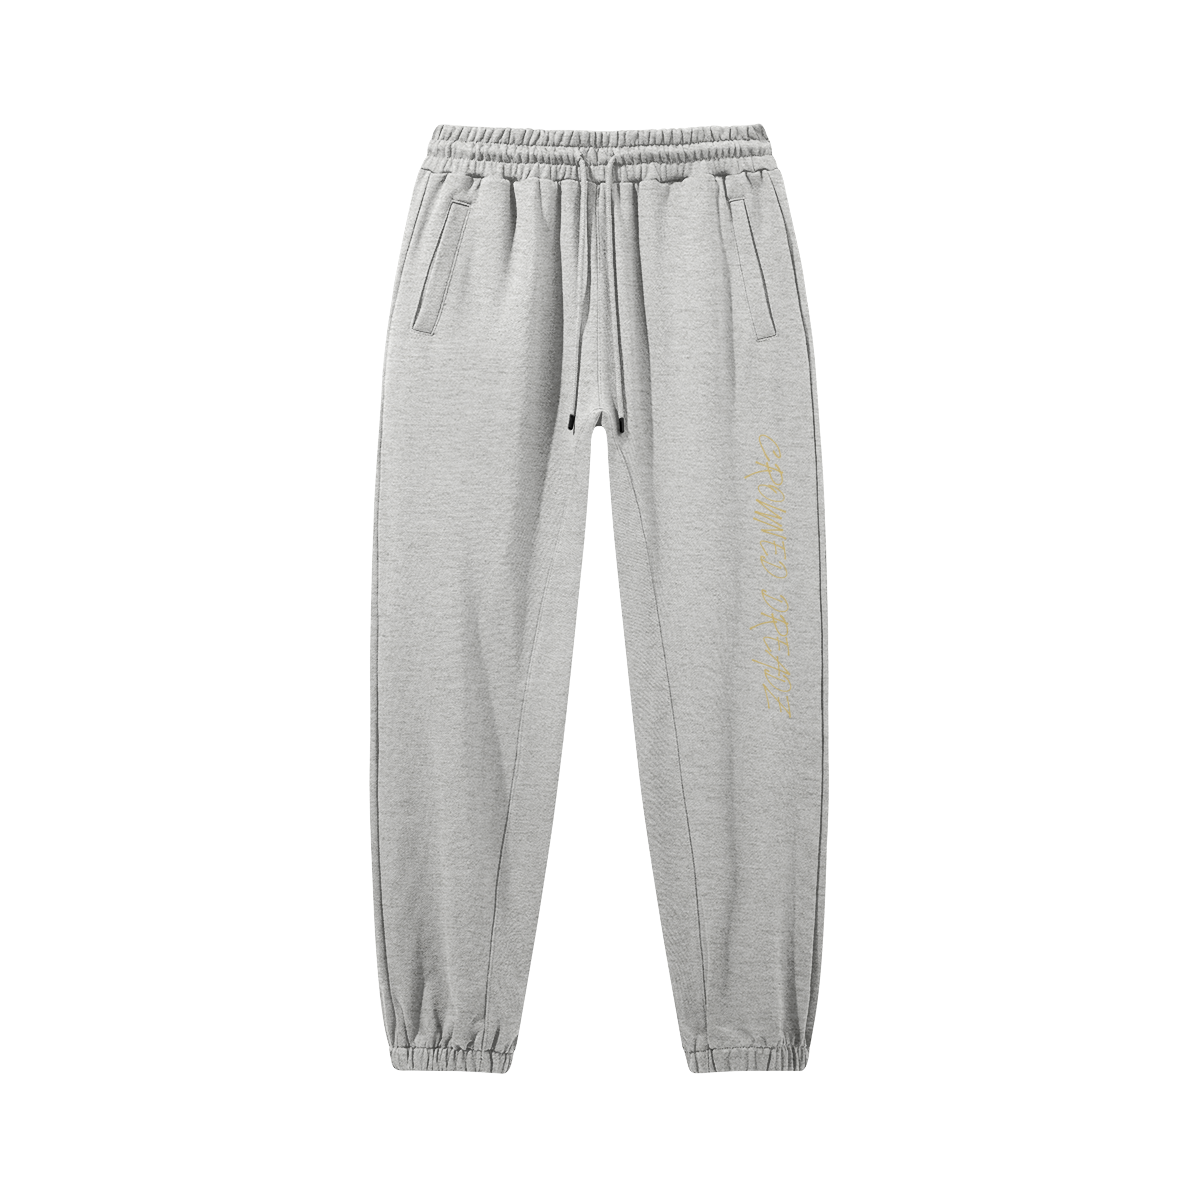 Heather Gray - Crowned Dreadz 380GSM Unisex Heavyweight Baggy Sweatpants - unisex sweatpants at TFC&H Co.